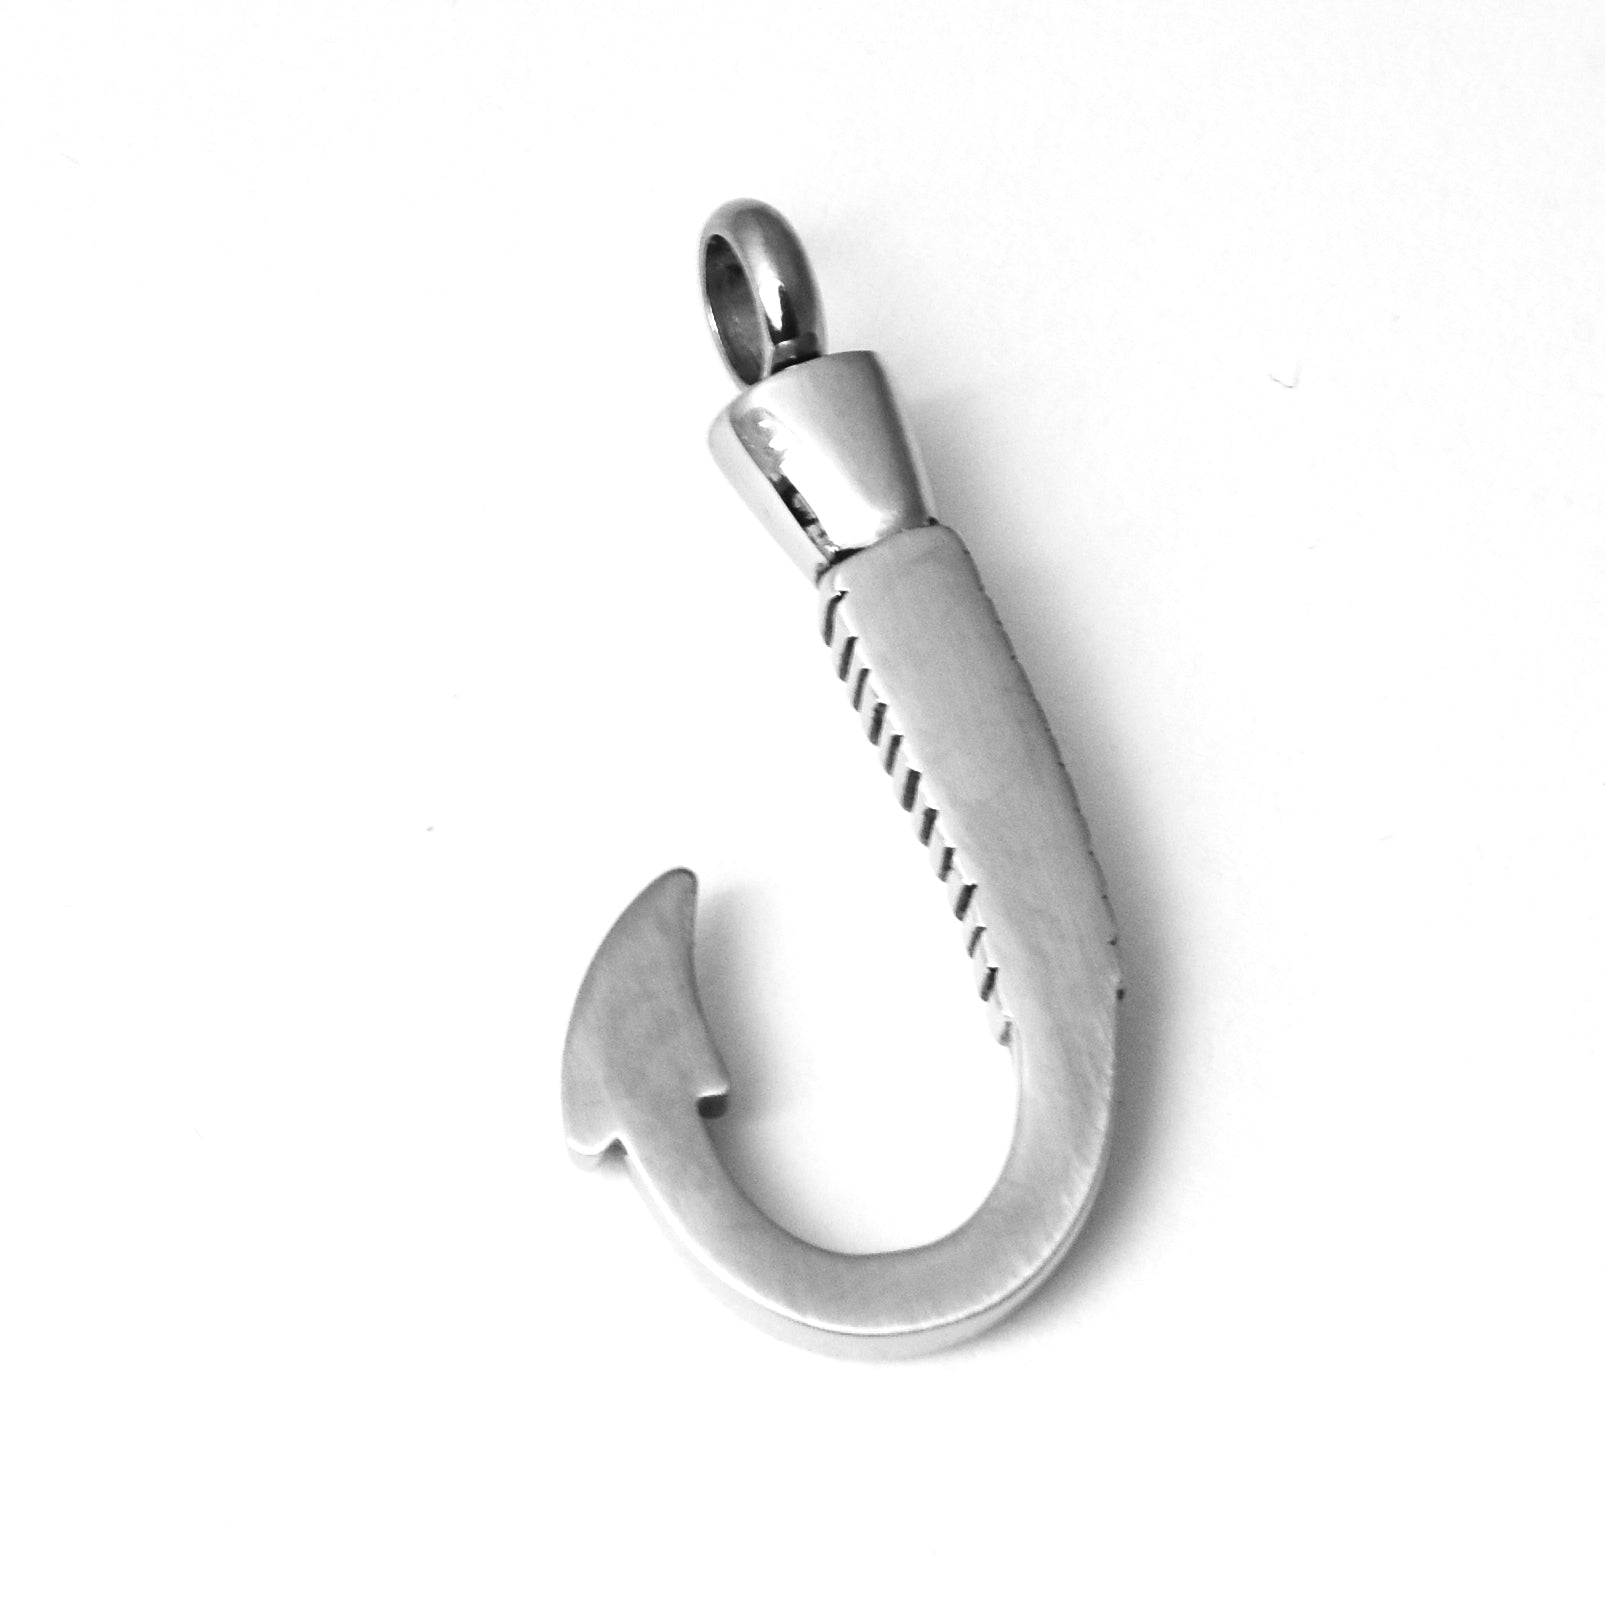 Stainless Steel Fishing Hook Keepsake Dainty Pendant Necklace Unisex Ashes  Urn Holder Memorial Jewelry From Weikuijewelry, $2.01